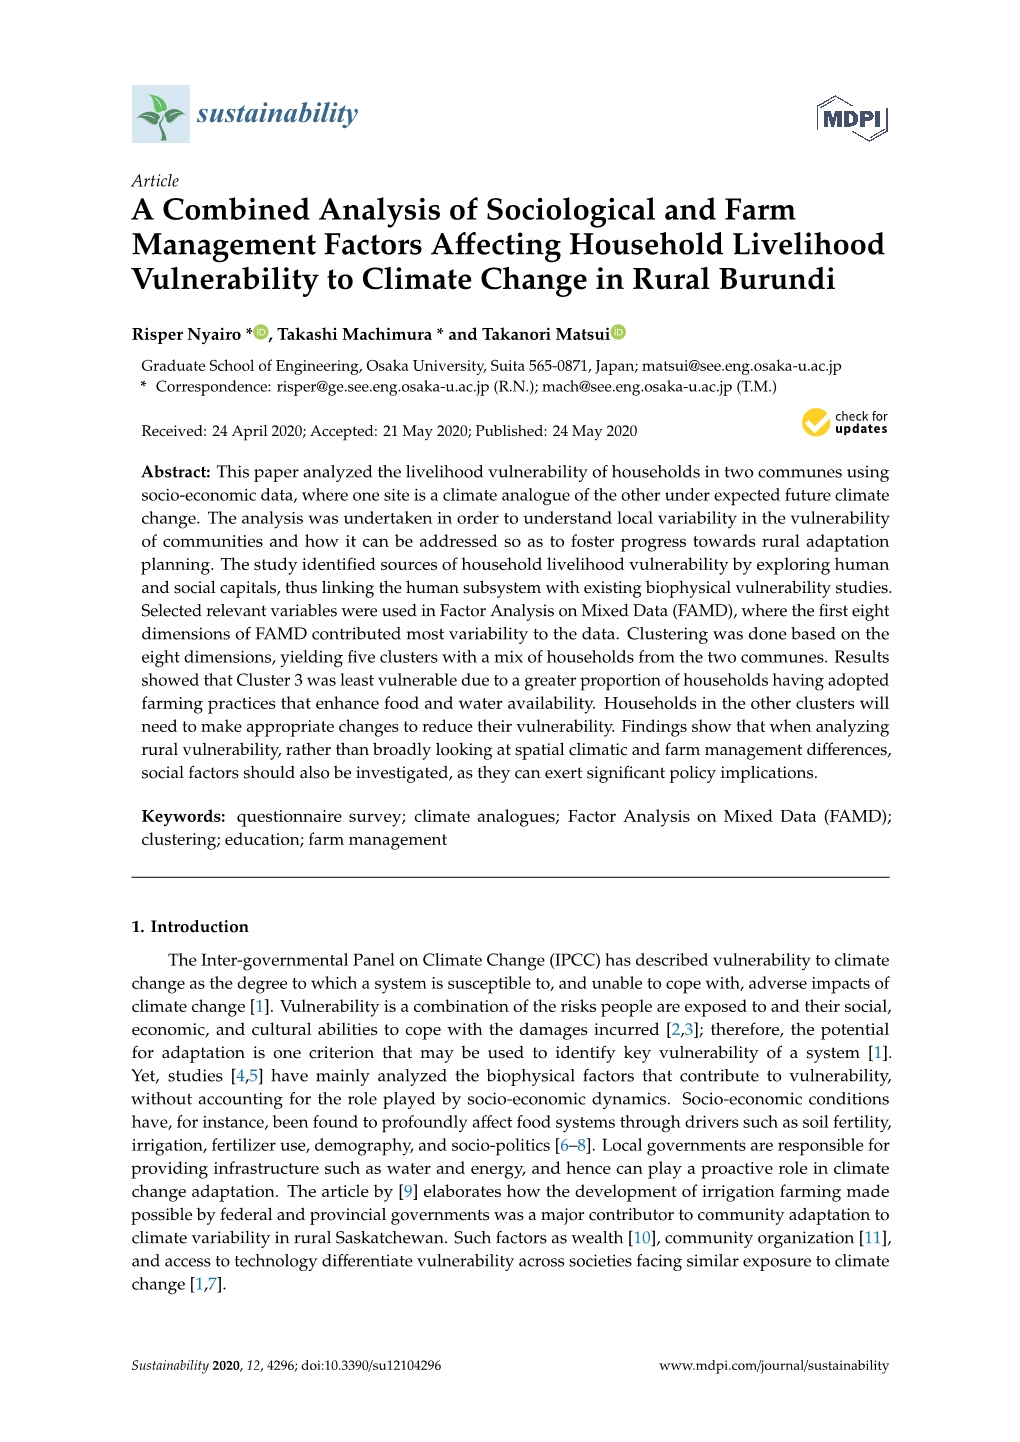 A Combined Analysis of Sociological and Farm Management Factors Aﬀecting Household Livelihood Vulnerability to Climate Change in Rural Burundi